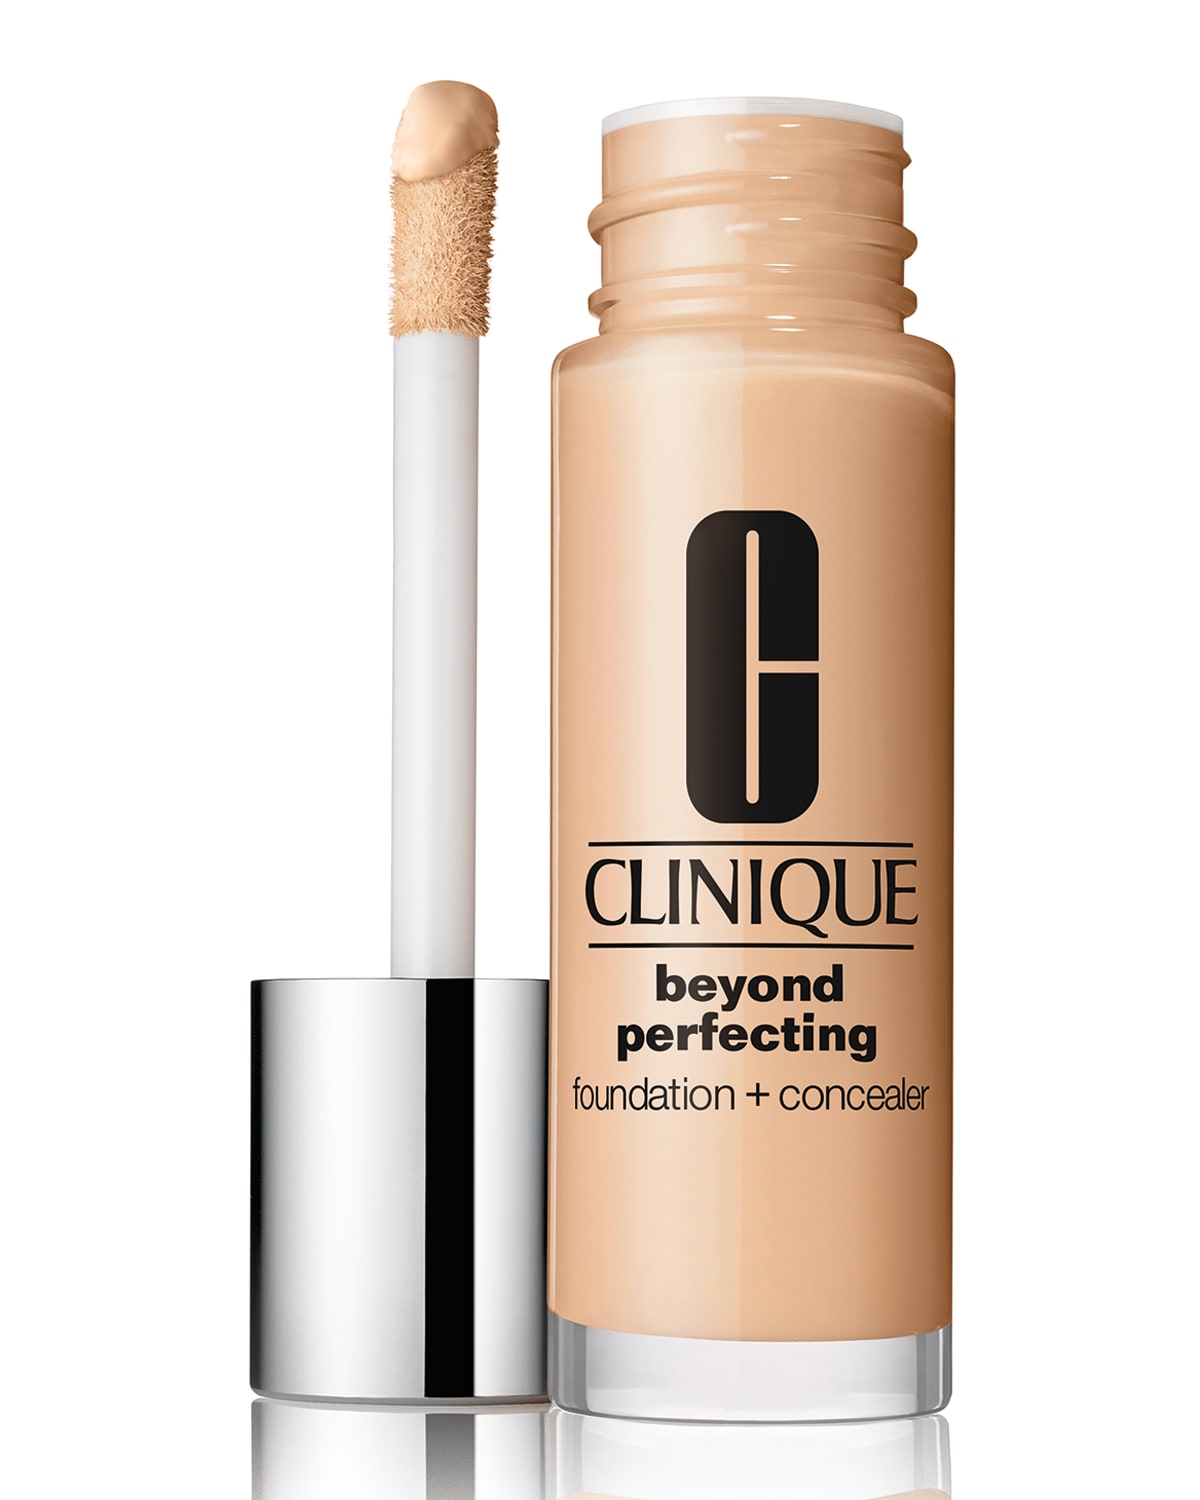 CLINIQUE BEYOND PERFECTING&TRADE; FOUNDATION + CONCEALER,PROD238260111